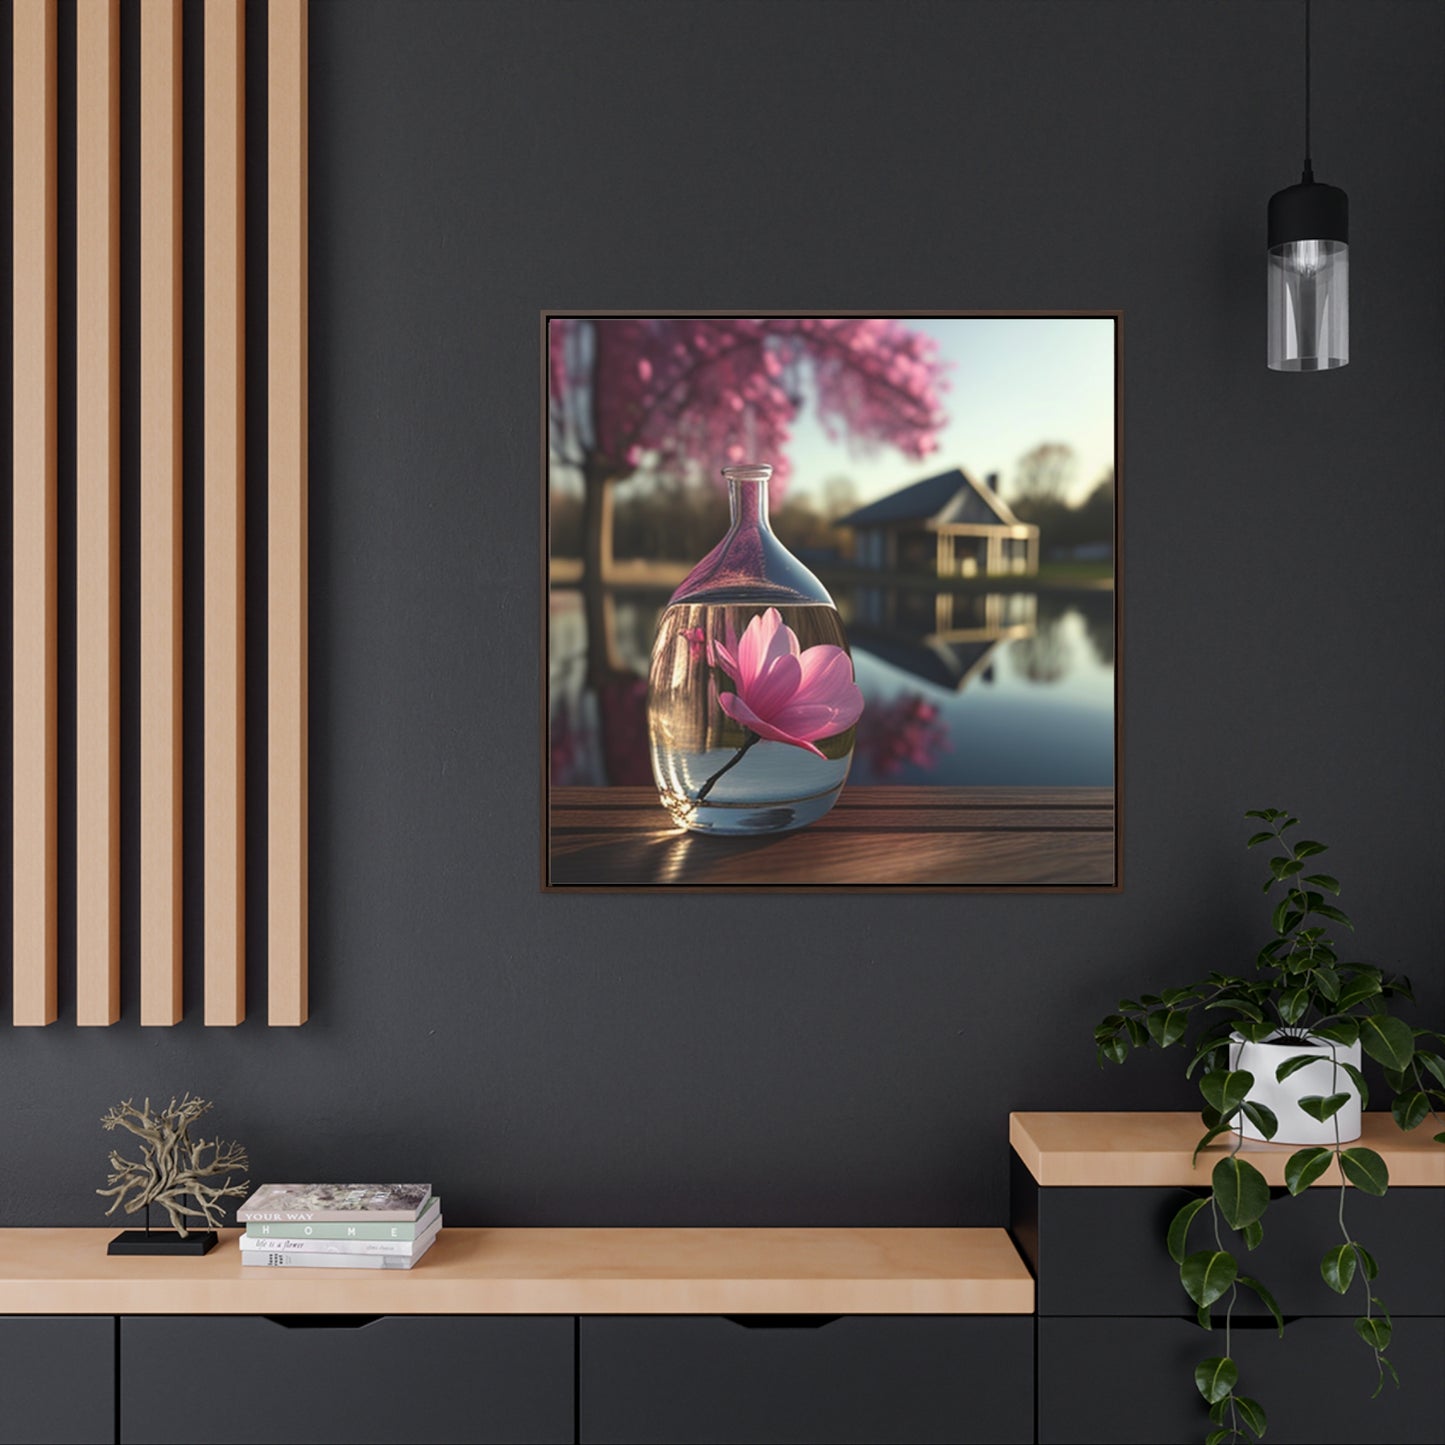 Gallery Canvas Wraps, Square Frame Magnolia in a Glass vase 2